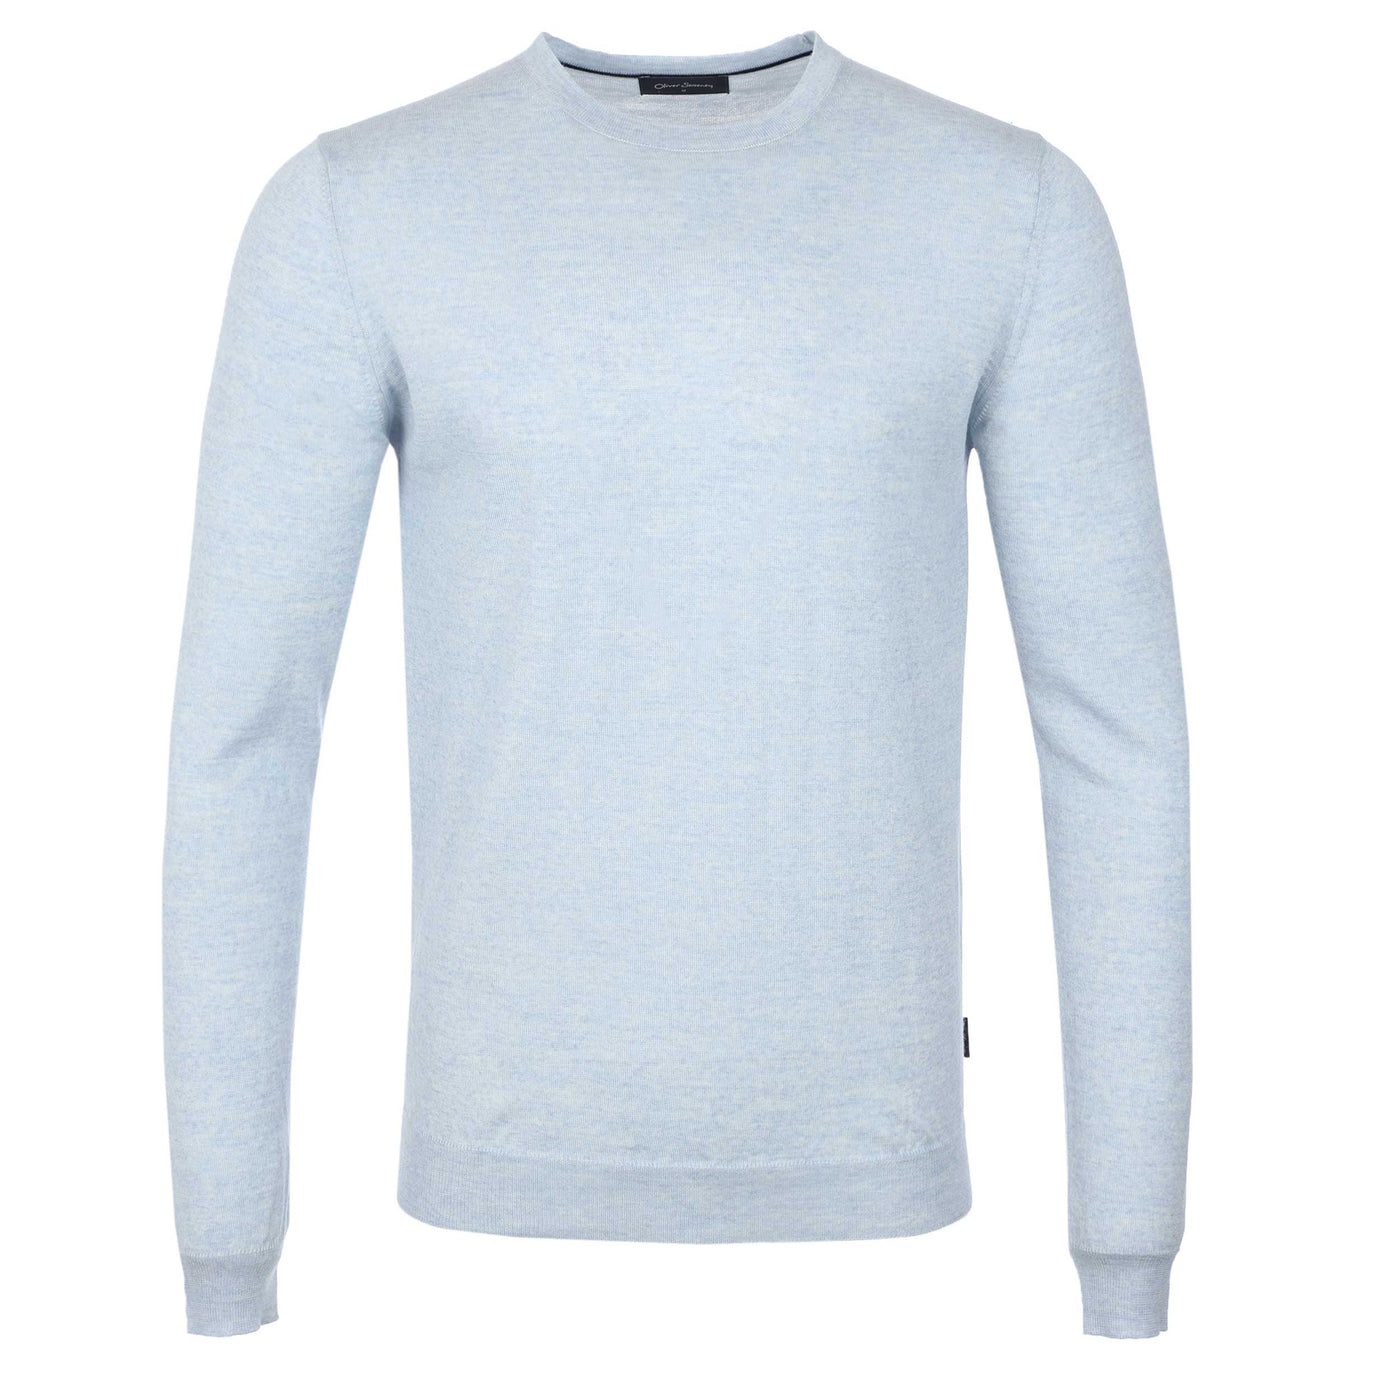 Oliver Sweeney Camber Knitwear in Light Blue Front